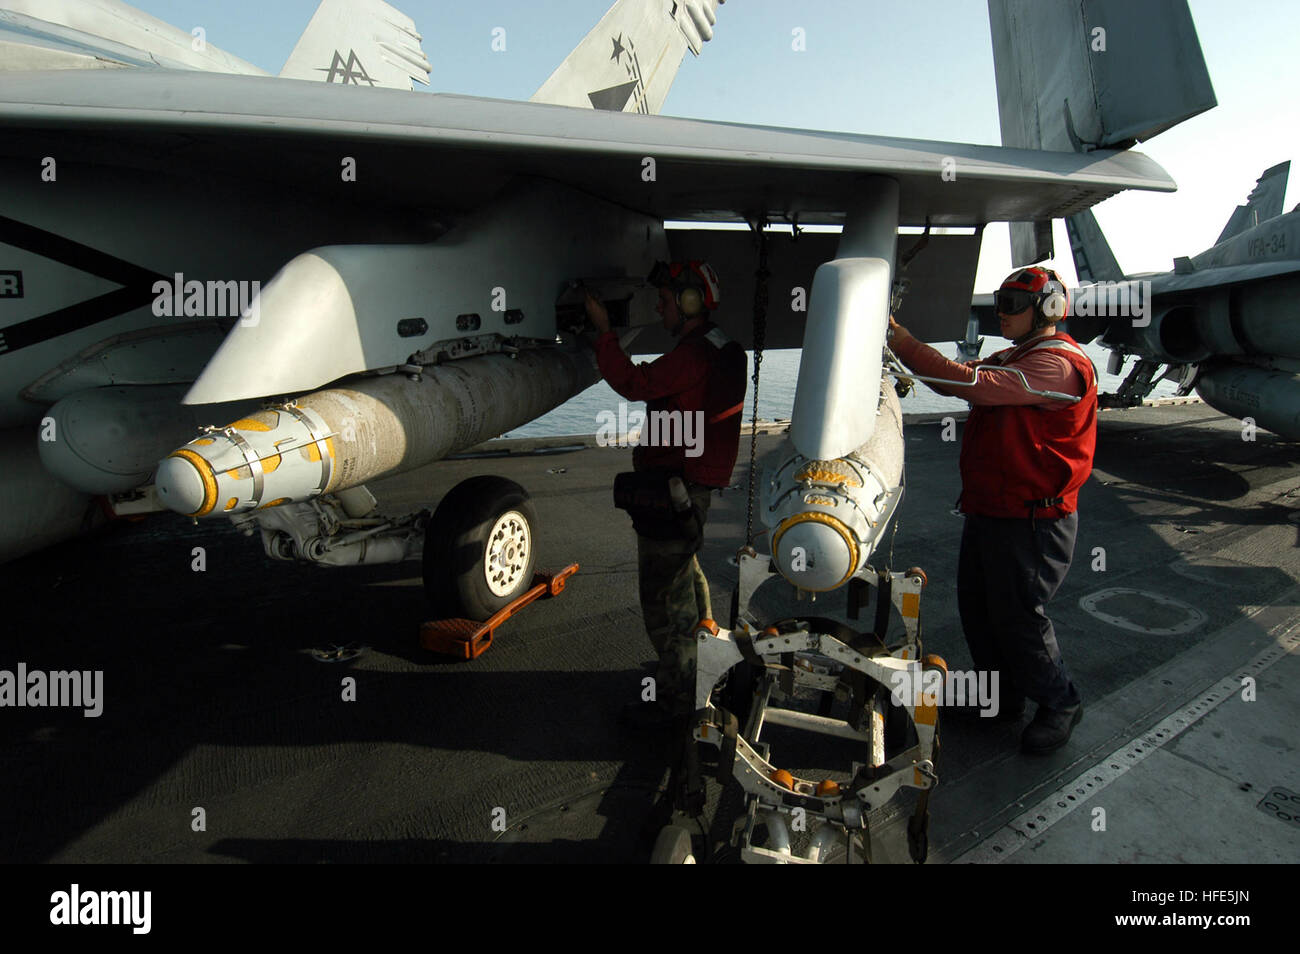 041109-N-8704K-005 Arabian Gulf (Nov. 9, 2004) - Aviation Ordnancemen, assigned to the ÒRampagersÓ of Strike Fighter Squadron Eight Three (VFA-83), finish loading two of the Navy's latest Satellite Guided Bomb, the GBU-38, aboard the conventionally powered aircraft carrier USS John F. Kennedy (CV 67). The GBU-38 is a 500-pound Joint Direct Attack Munition (JDAM) that uses a standard Mk-82 bomb, and was developed for precision bombing in urban warfare. The Joint Direct Attack Munition (JDAM) is a guidance kit that converts existing unguided bombs into precision-guided 'smart' munitions. The tai Stock Photo